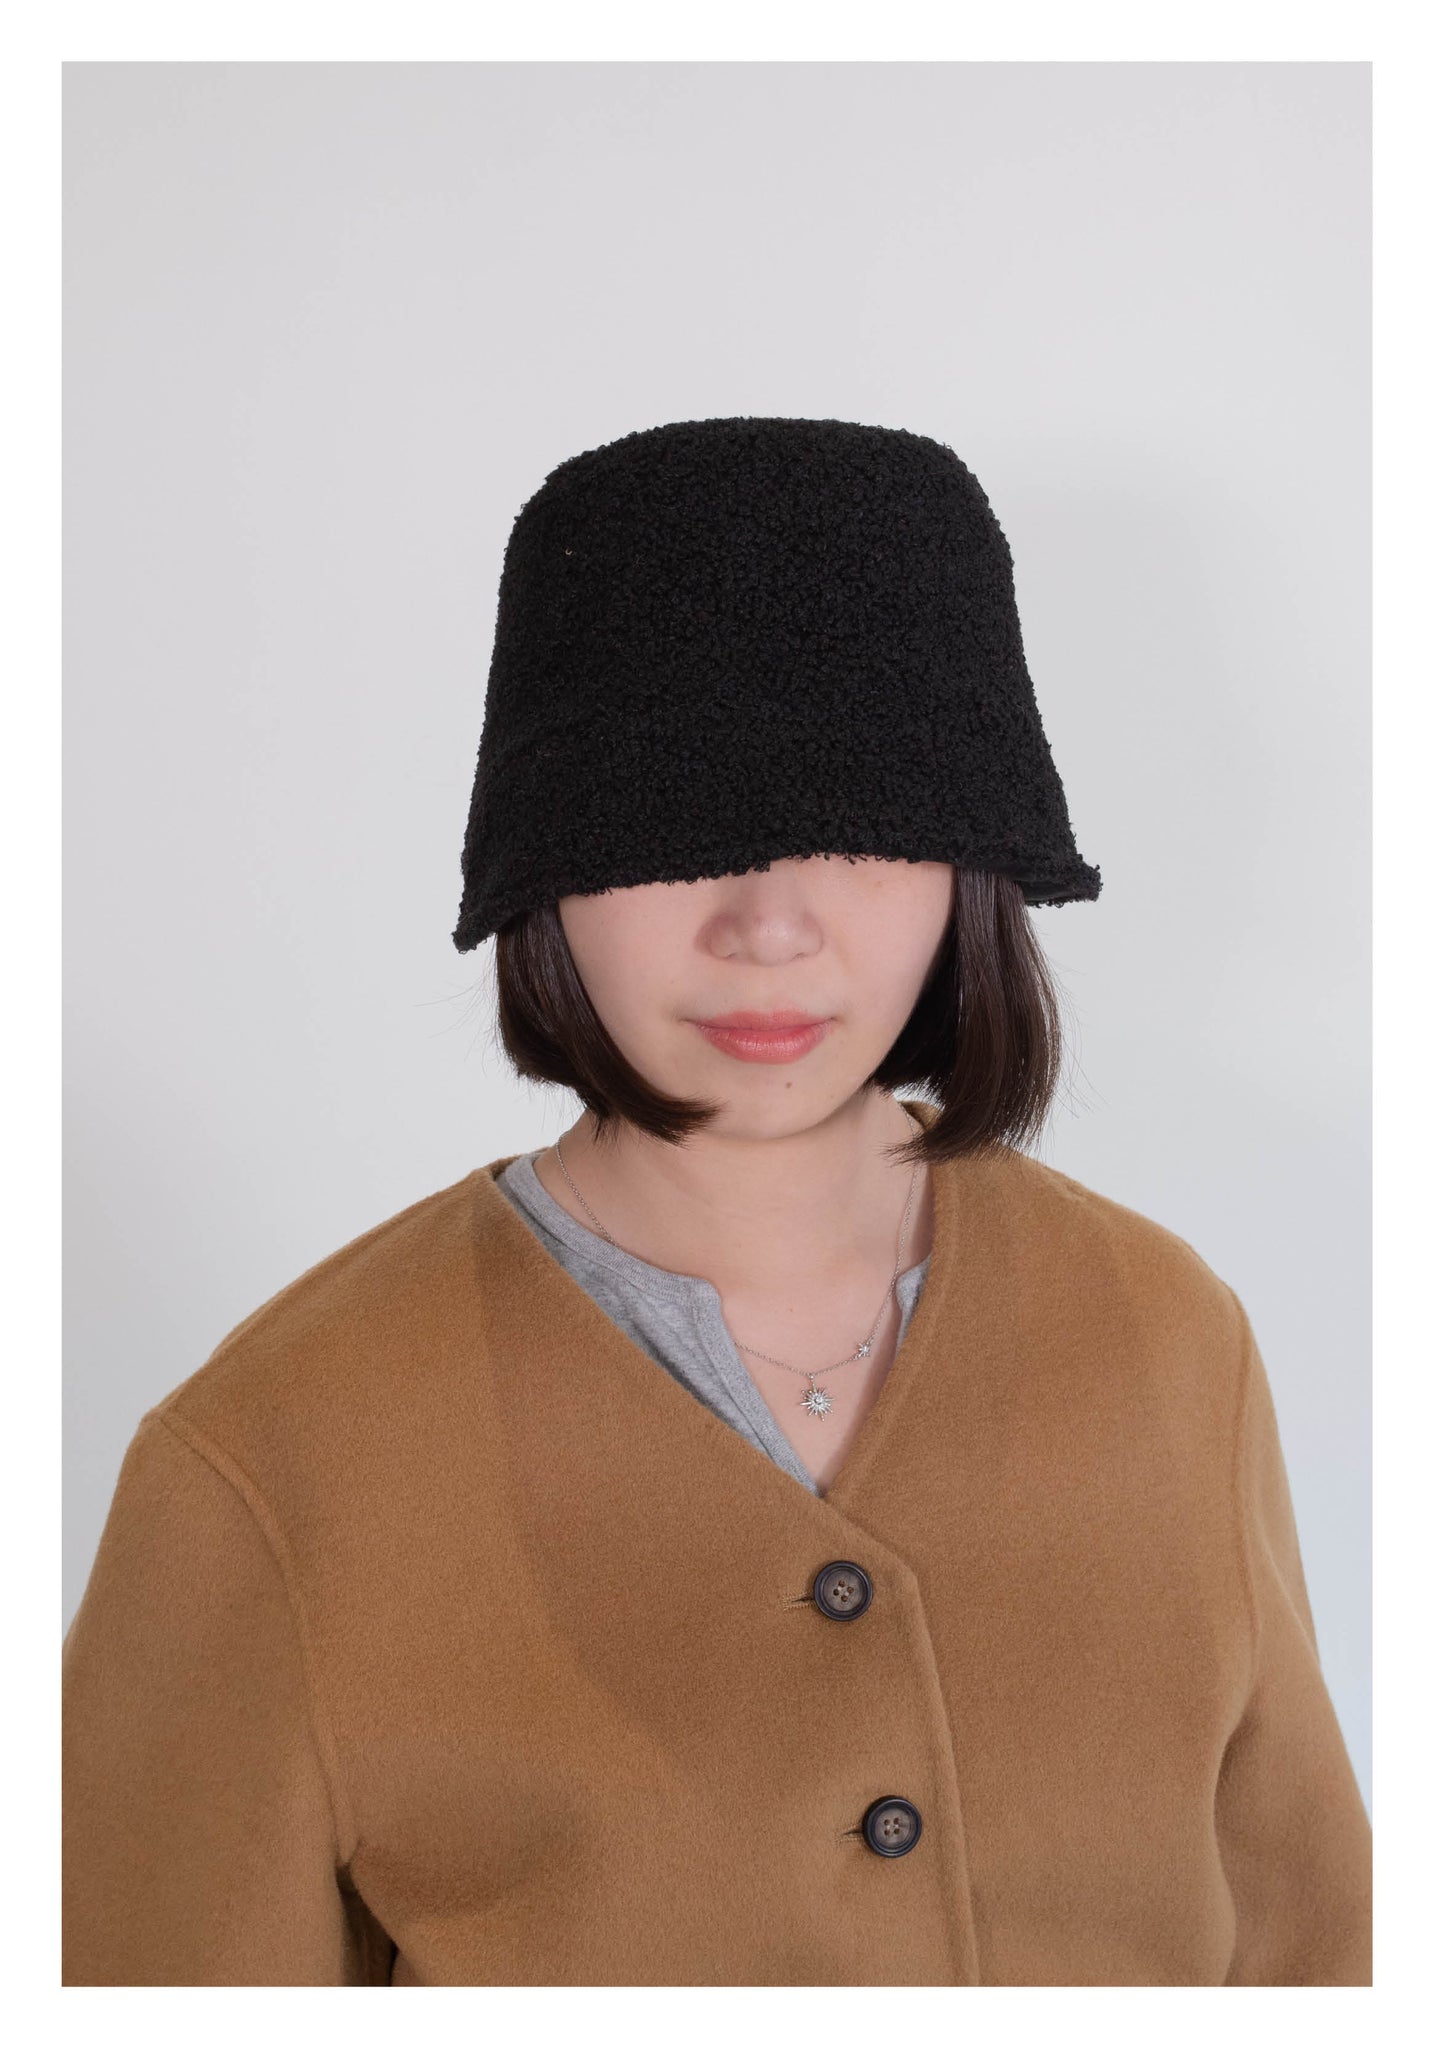 Double Sides Shearling Suede Buckle Hat Black - whoami